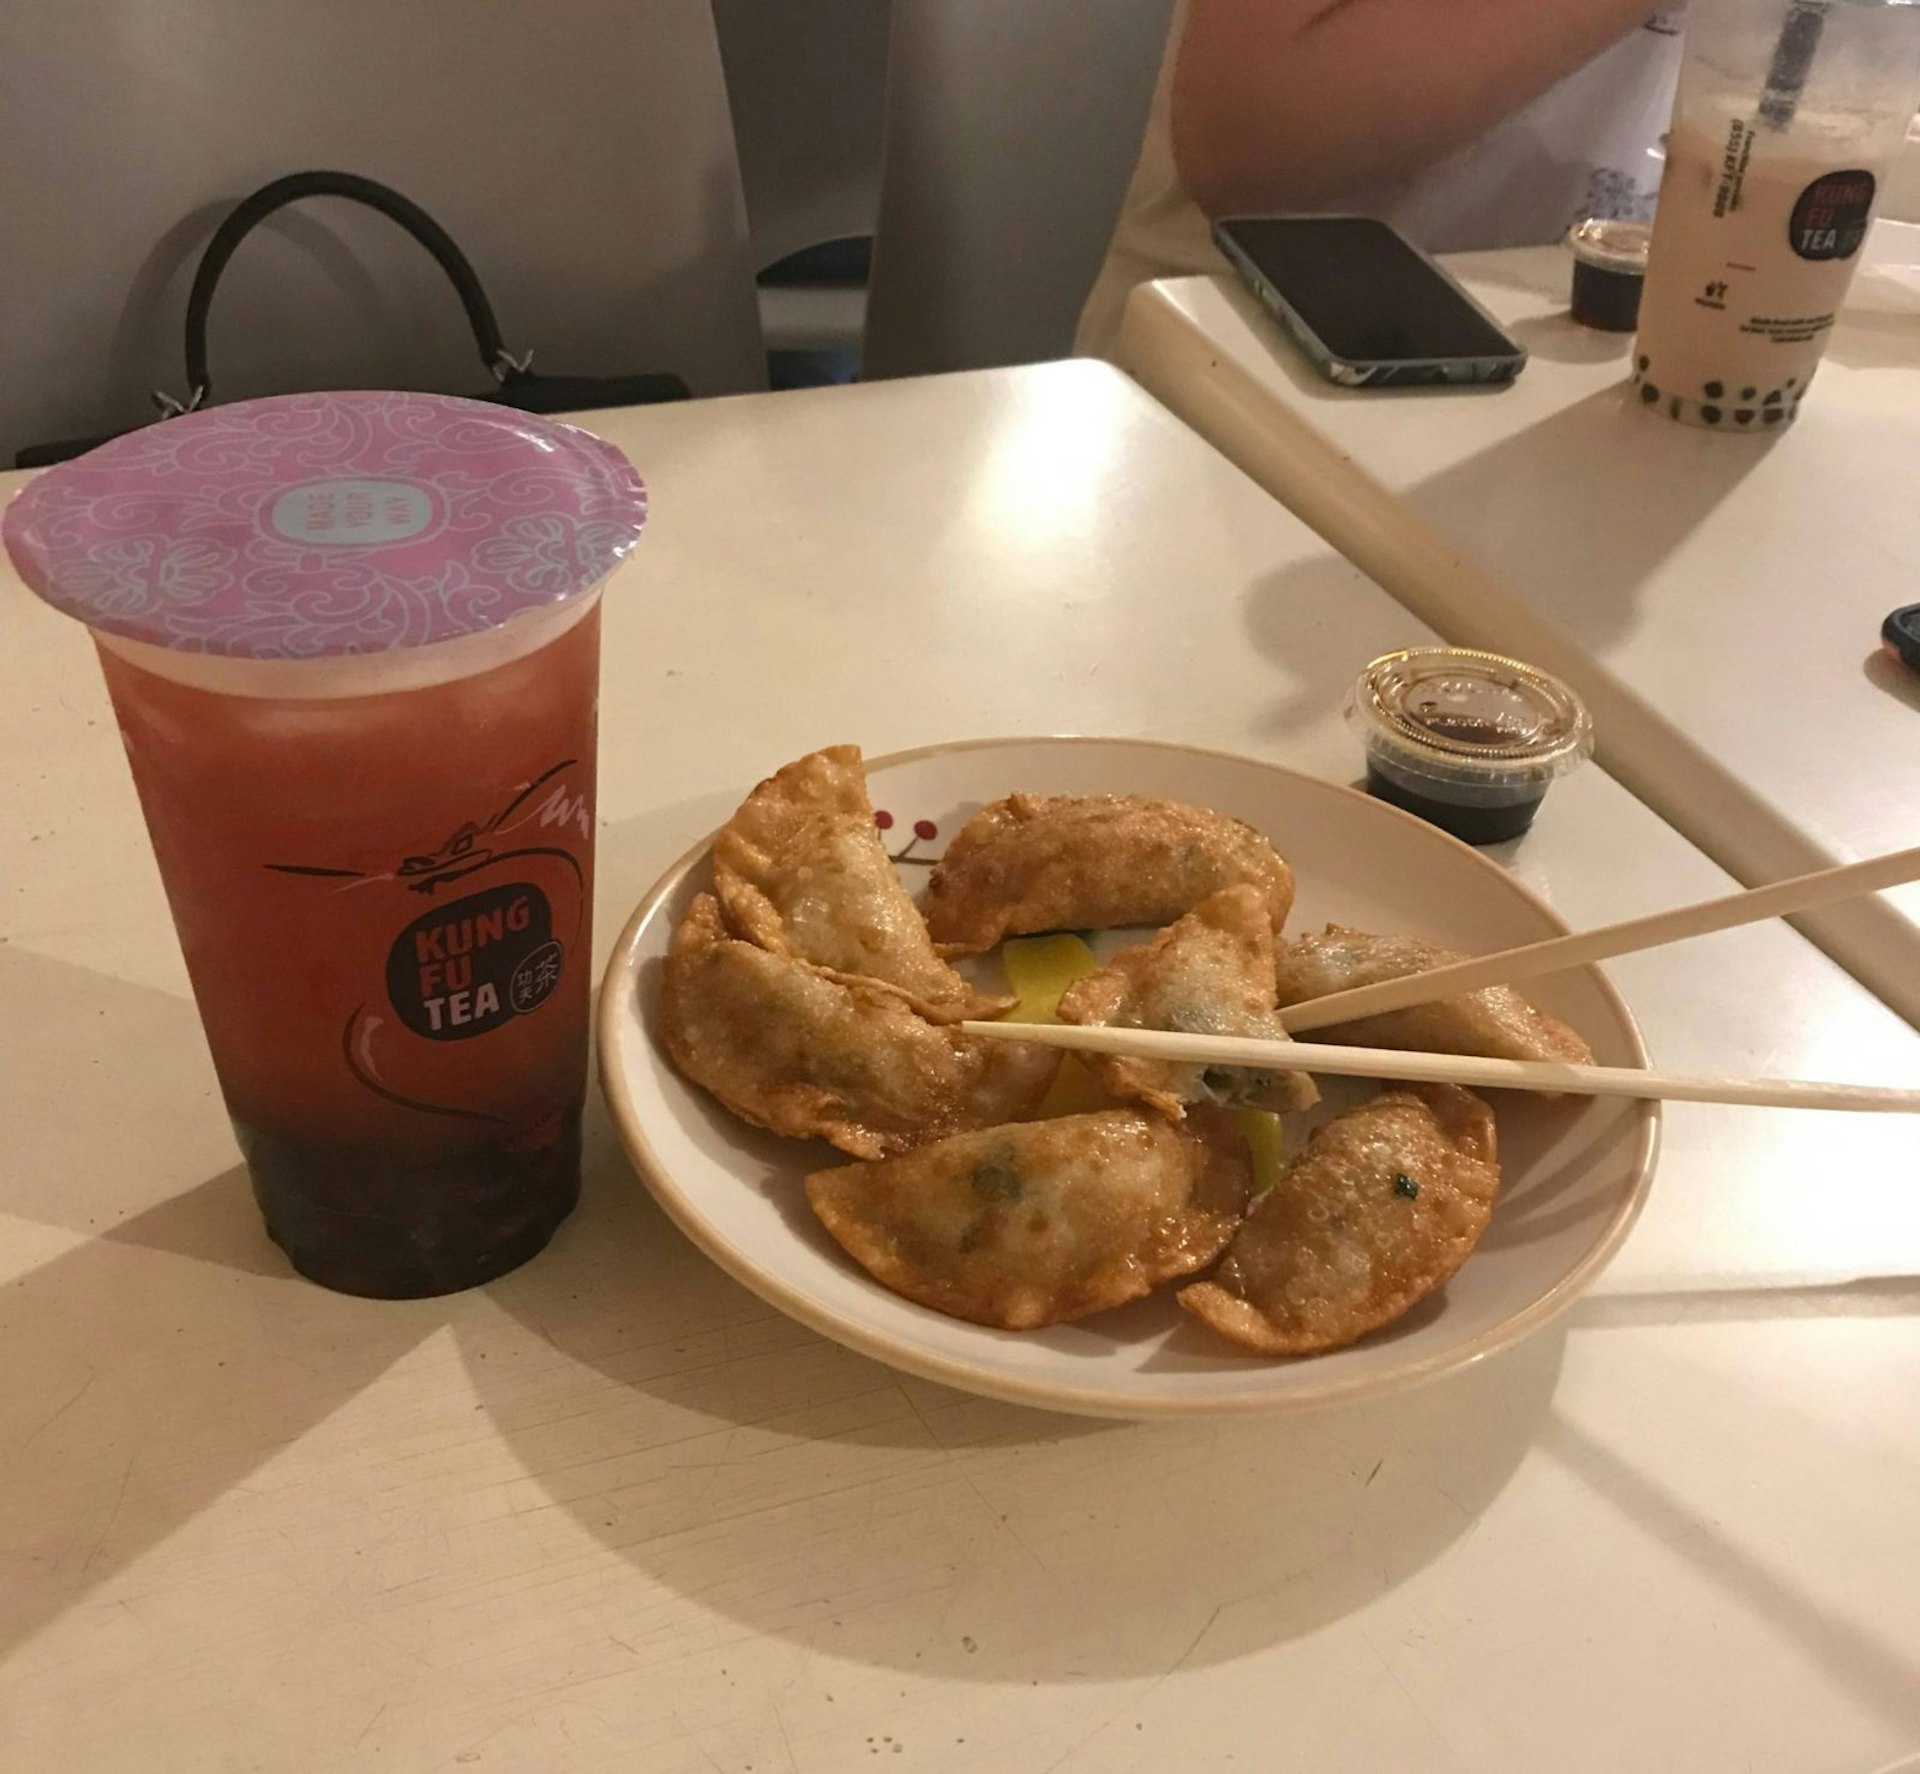 A strawberry green bubble tea from Kung Fu Tea, accompanied by some fried chicken dumplings. 